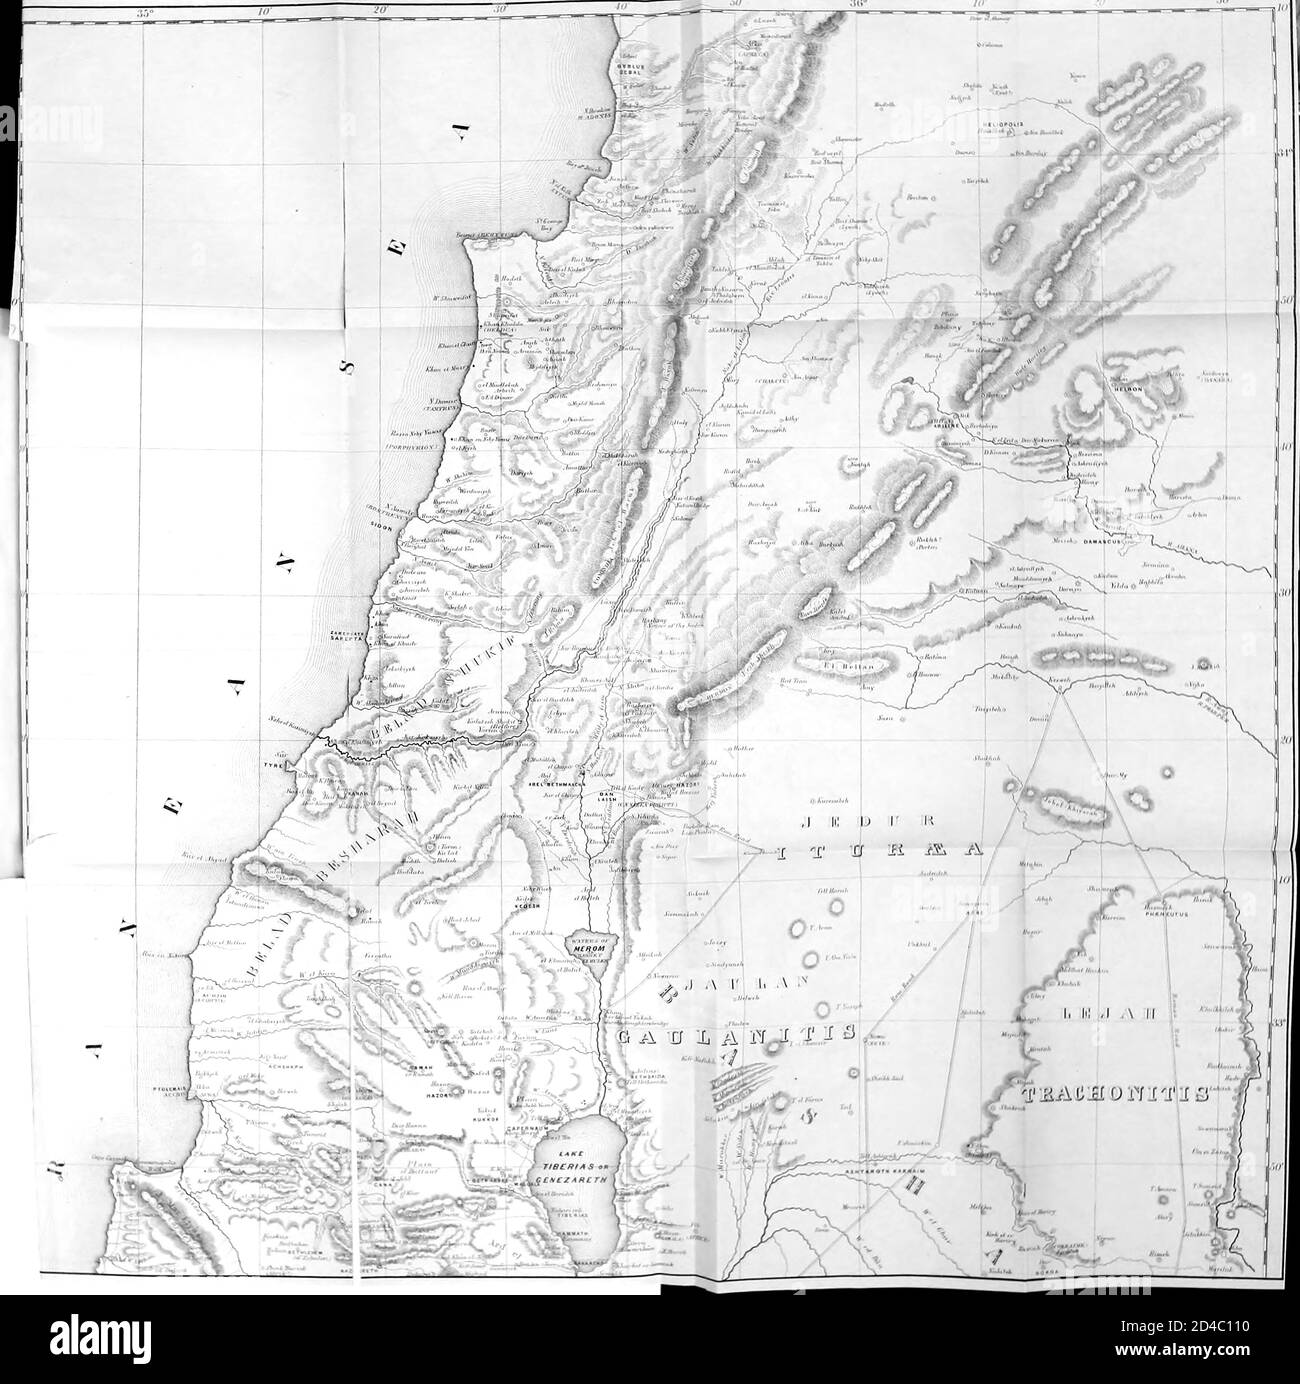 Map of Palestine [Lebanon and Galilee] from the book 'Palestine, past and present' with Biblical, Literary and Scientific Notices by Rev. Osborn, H. S. (Henry Stafford), 1823-1894 Published in Philadelphia, by J. Challen & son; in 1859 Stock Photo